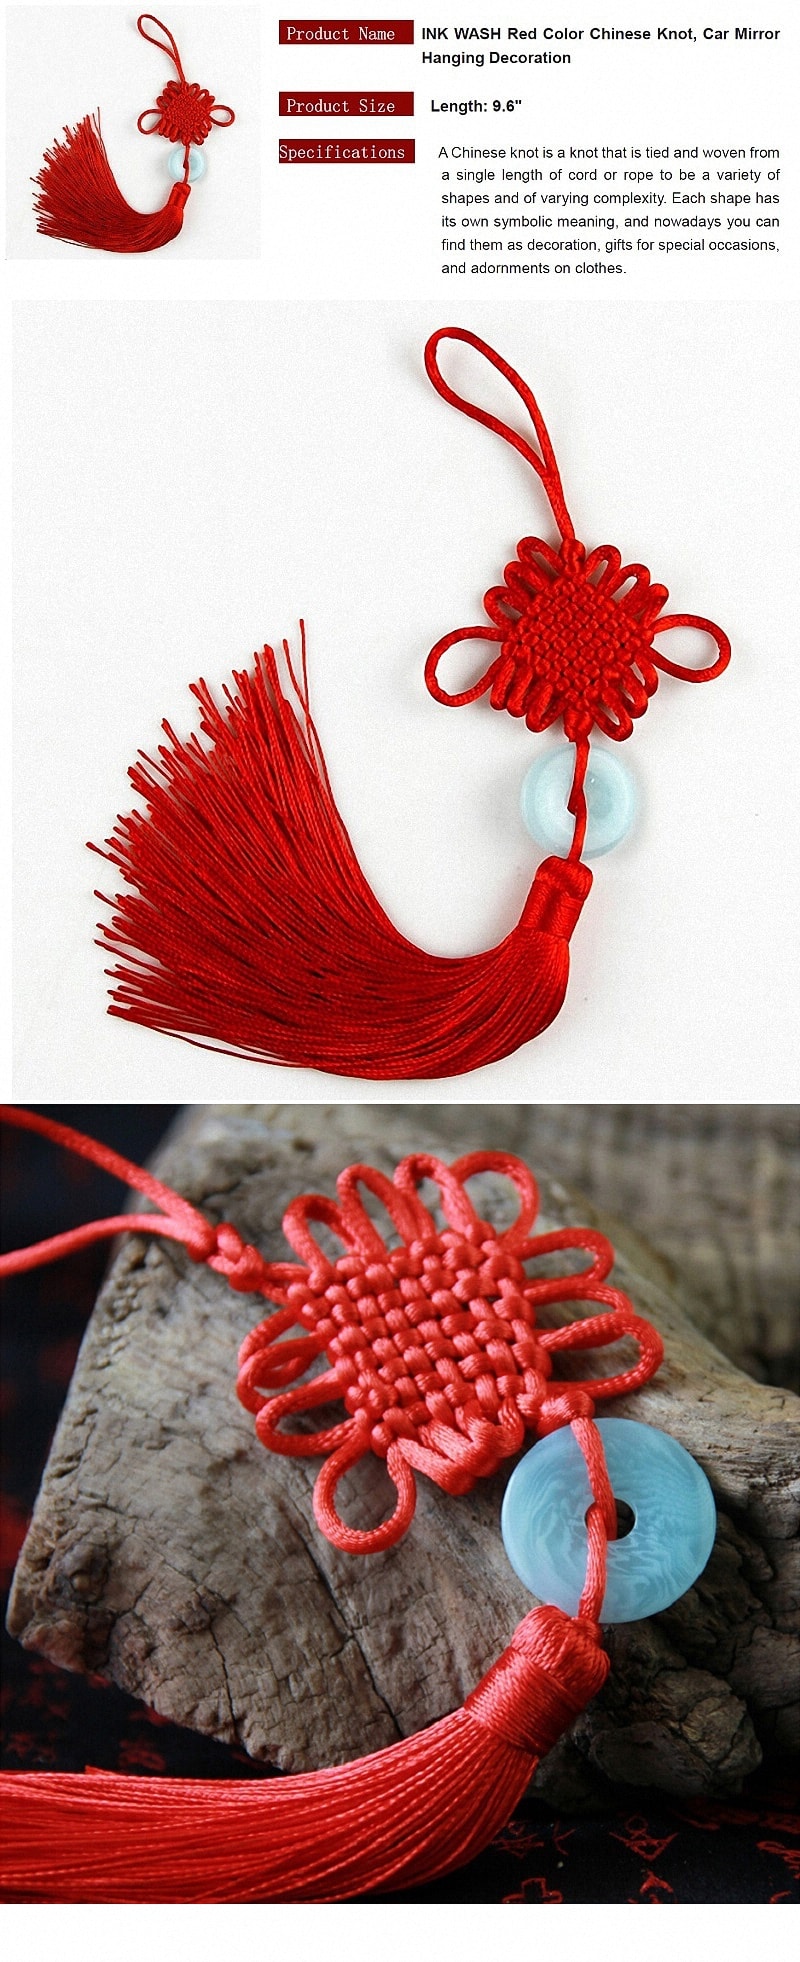 INK WASH Red Color Chinese Knot Car Mirror Hanging Decoration